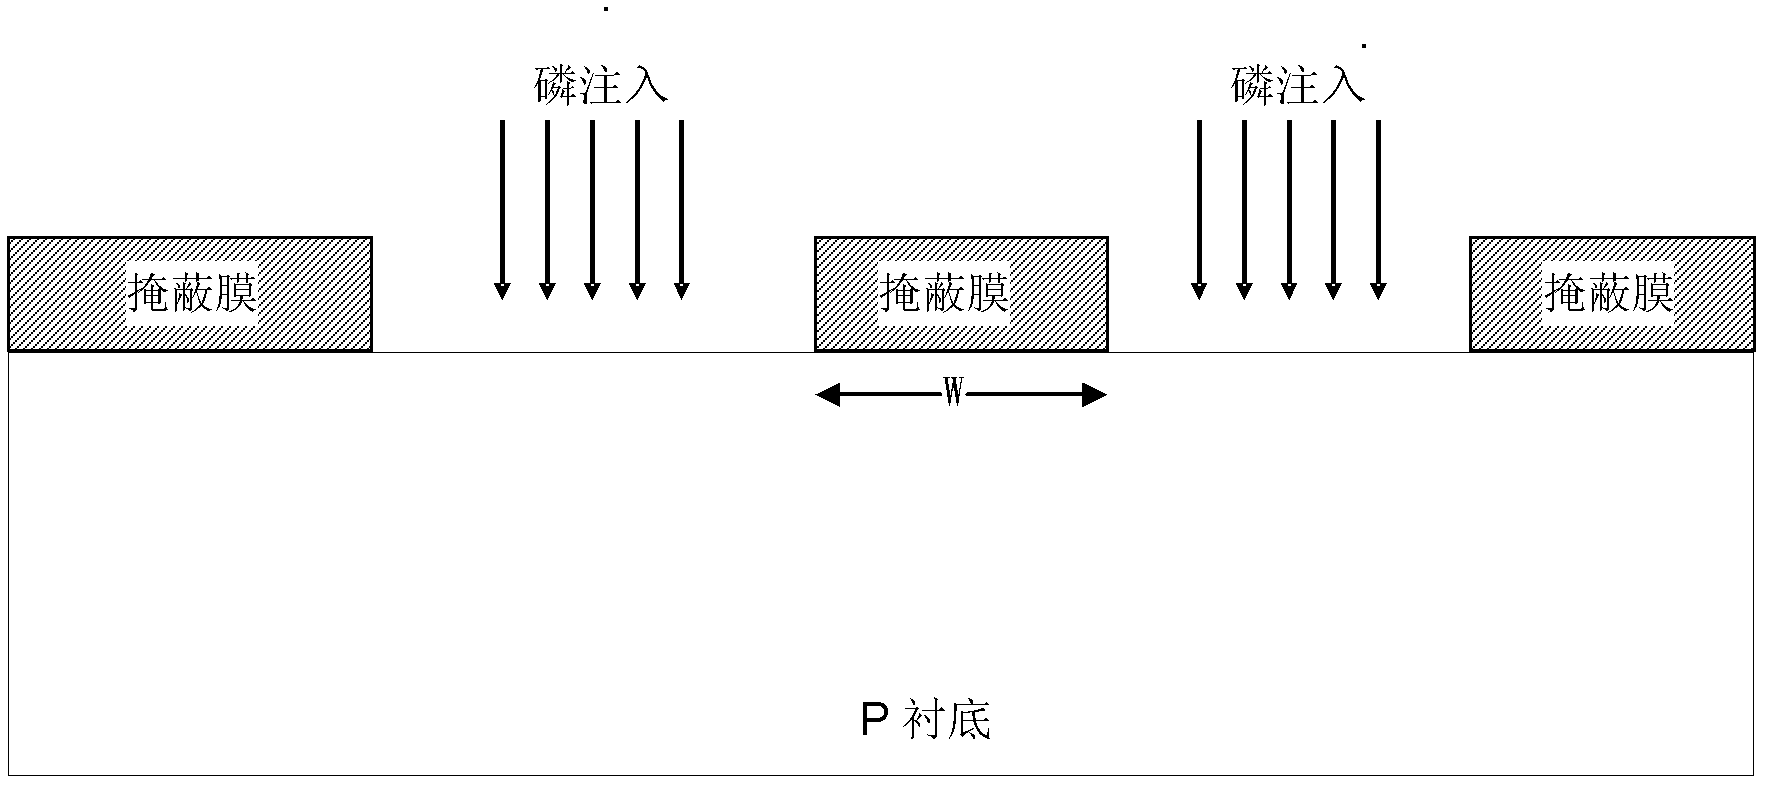 Manufacturing method of high voltage isolating N type laterally diffused metal oxide semiconductor (LDMOS) component